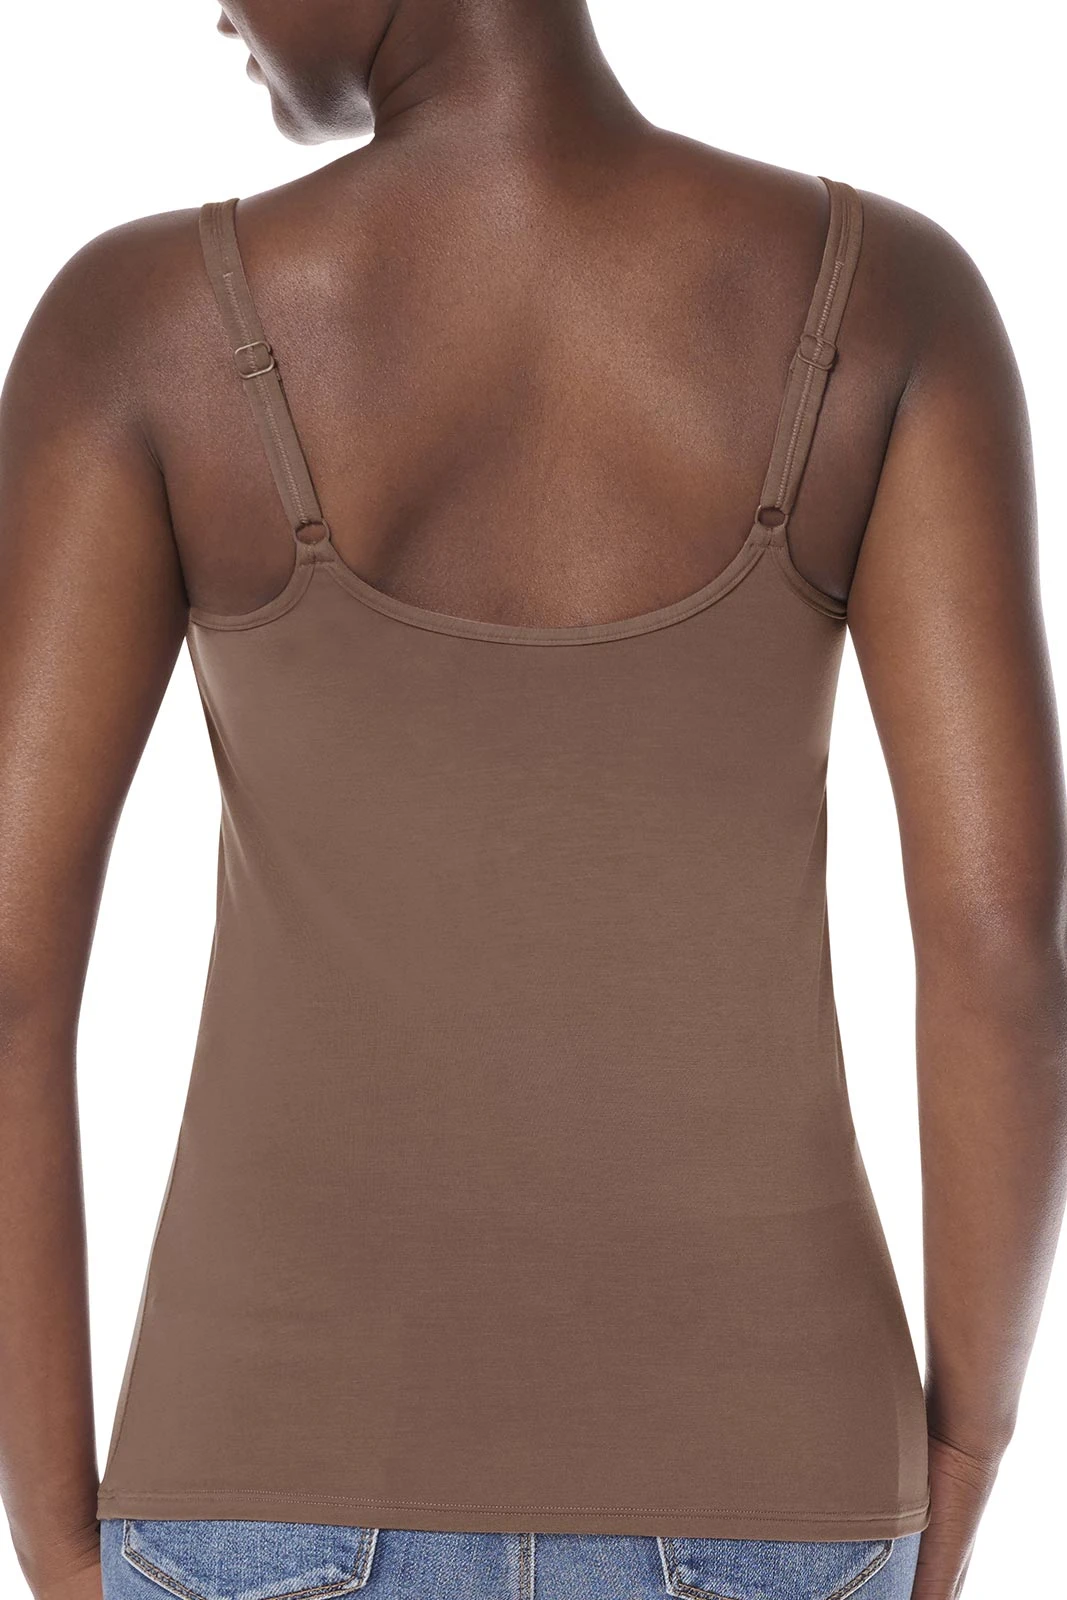 Amoena UK - Our popular Valletta top is available in two